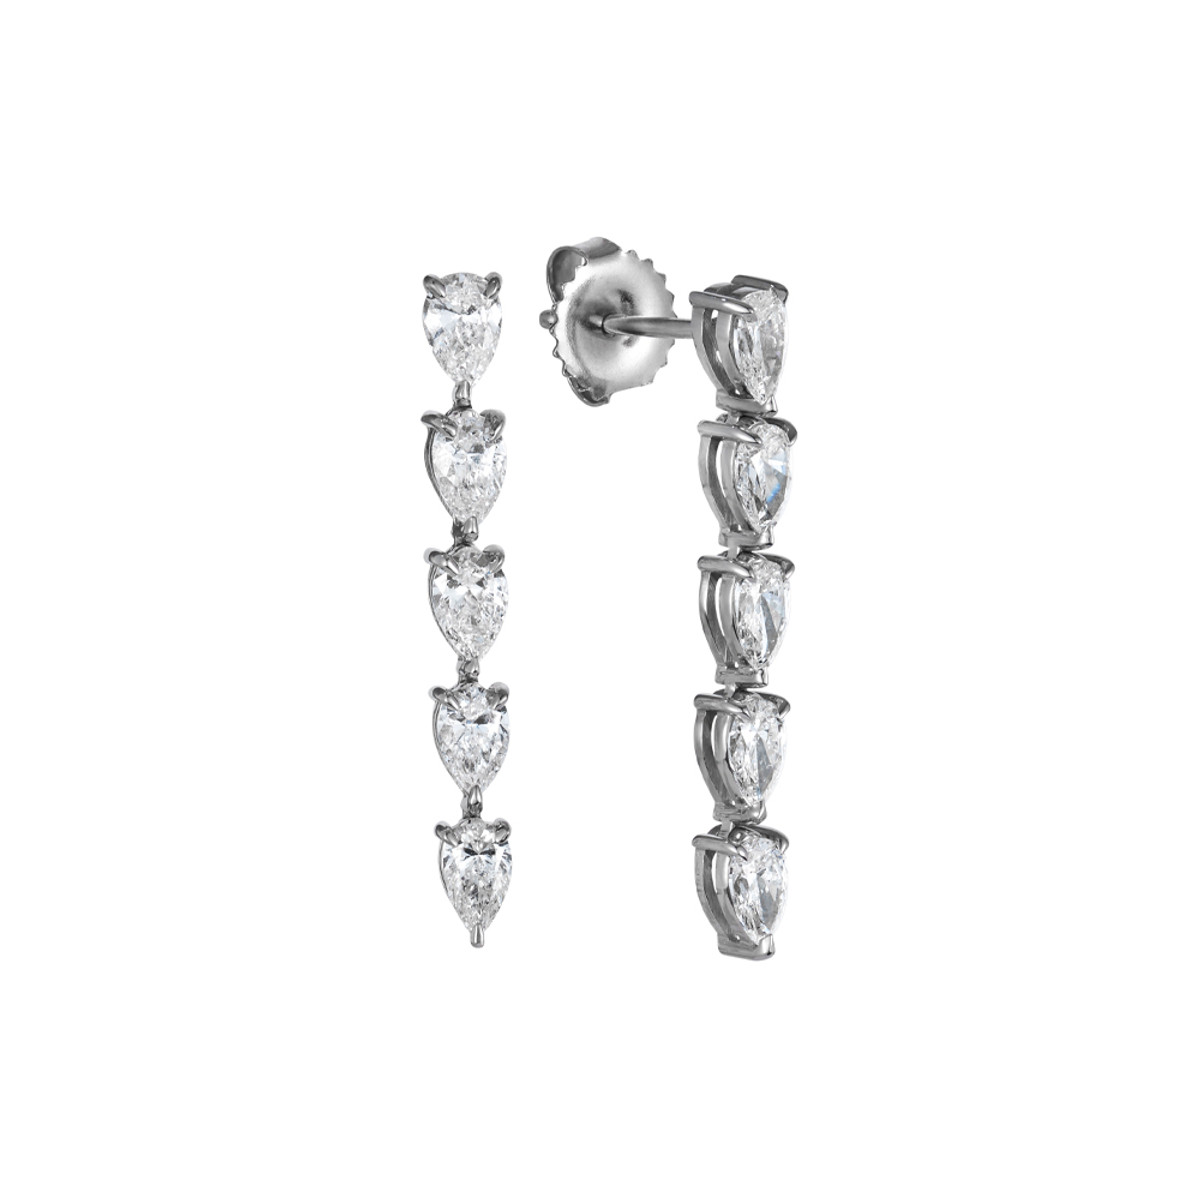 Hyde Park Collection 18K White Gold 2.04ct Diamond Drop Earrings-49144 Product Image